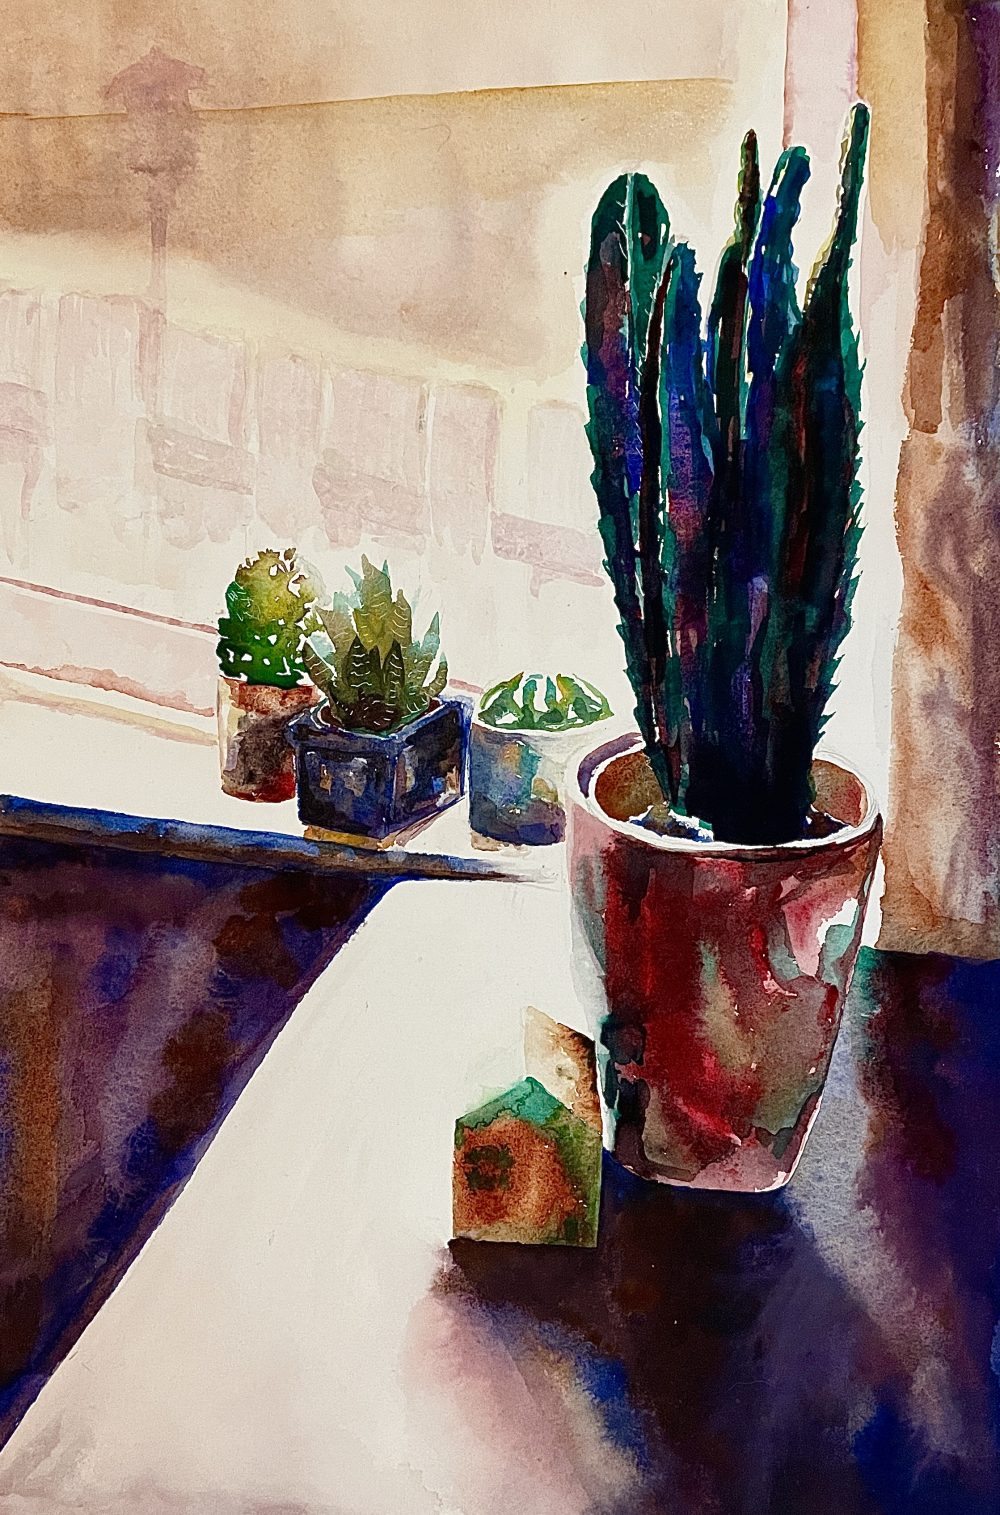 This is a watercolor image of some succulents, a cactus, and a small house figure in a windowsill, dramatically backlit by the incoming daylight.